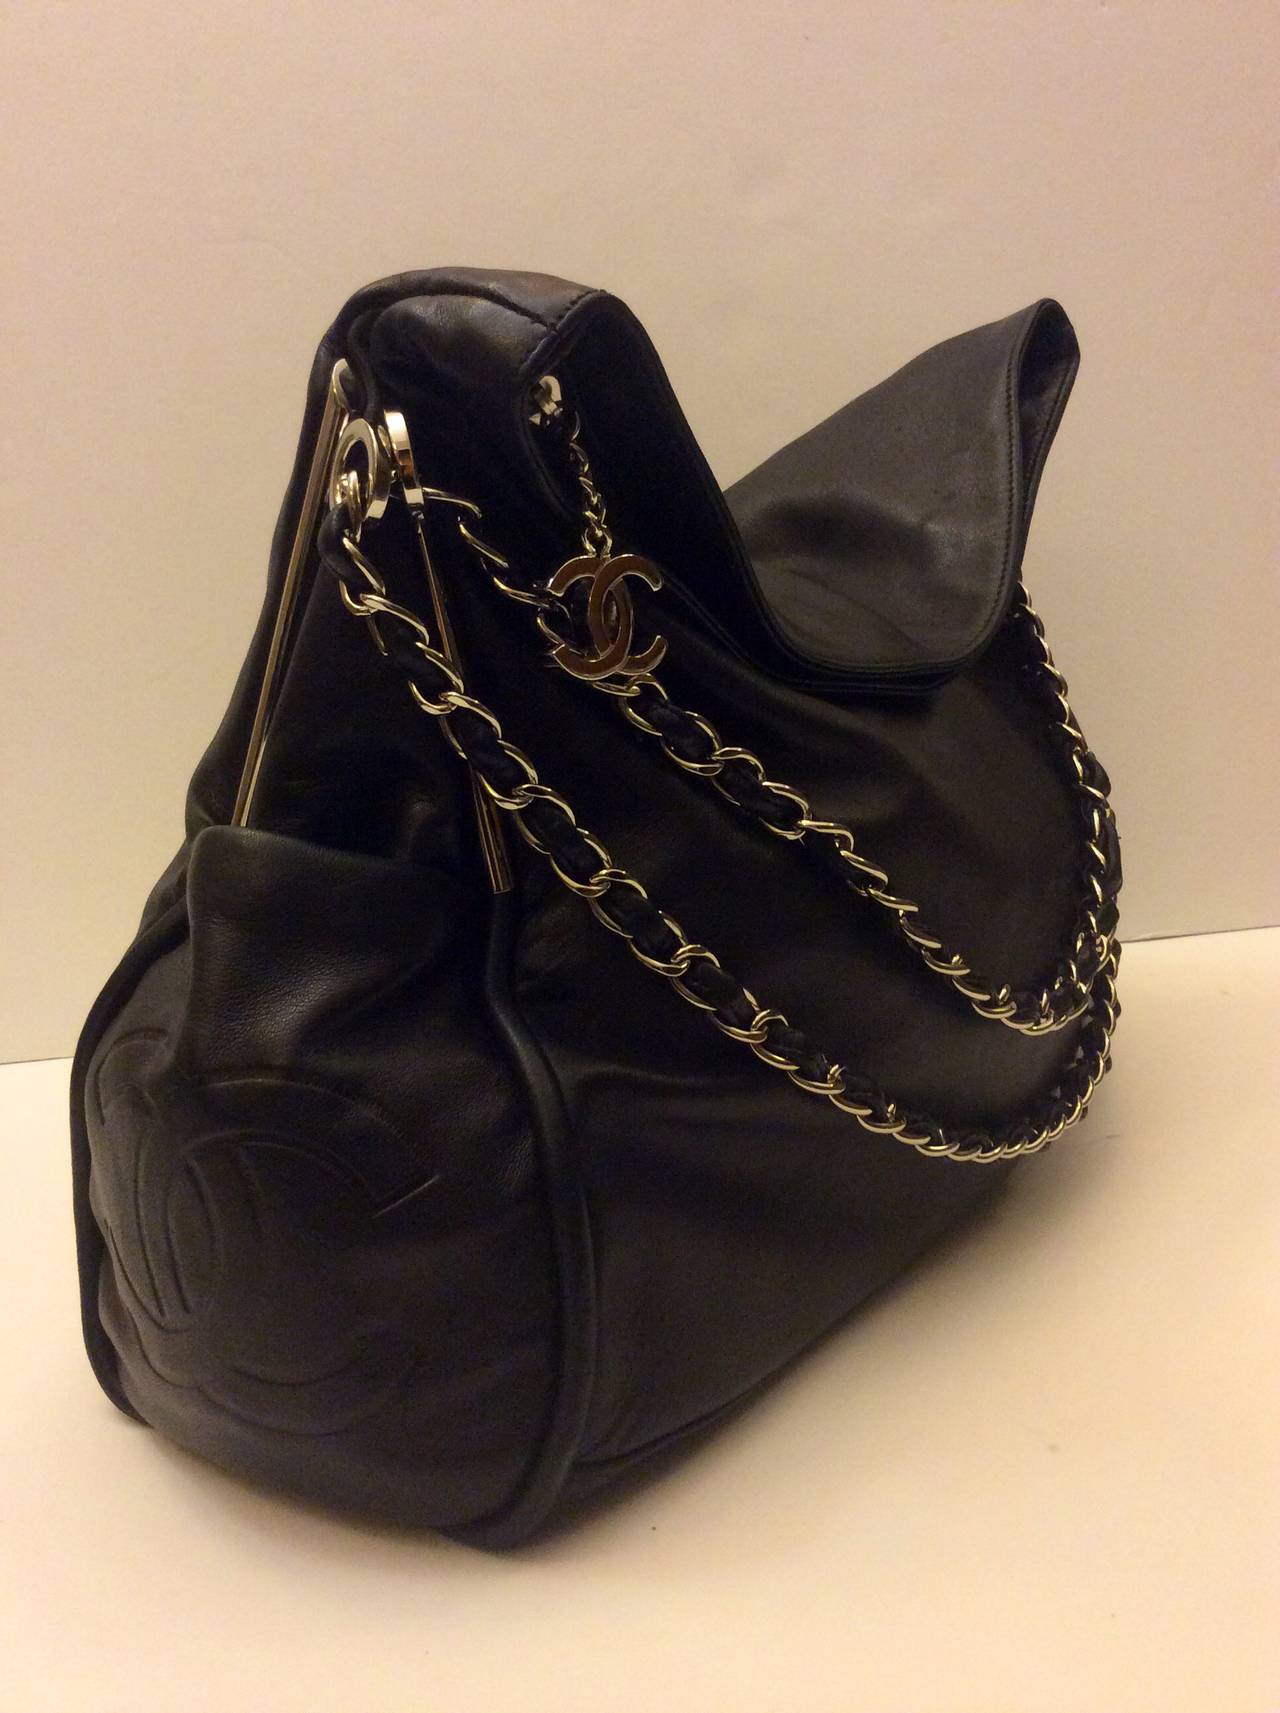 This is a Chanel soft lambskin hobo bag.  Ultimate Soft Line. Super soft black lambskin exterior. Beautiful double silver chain. The top of the bag folds over for that great slouchy look.  Chanel CC logo fabric lining. All silver hardware.  CC logo